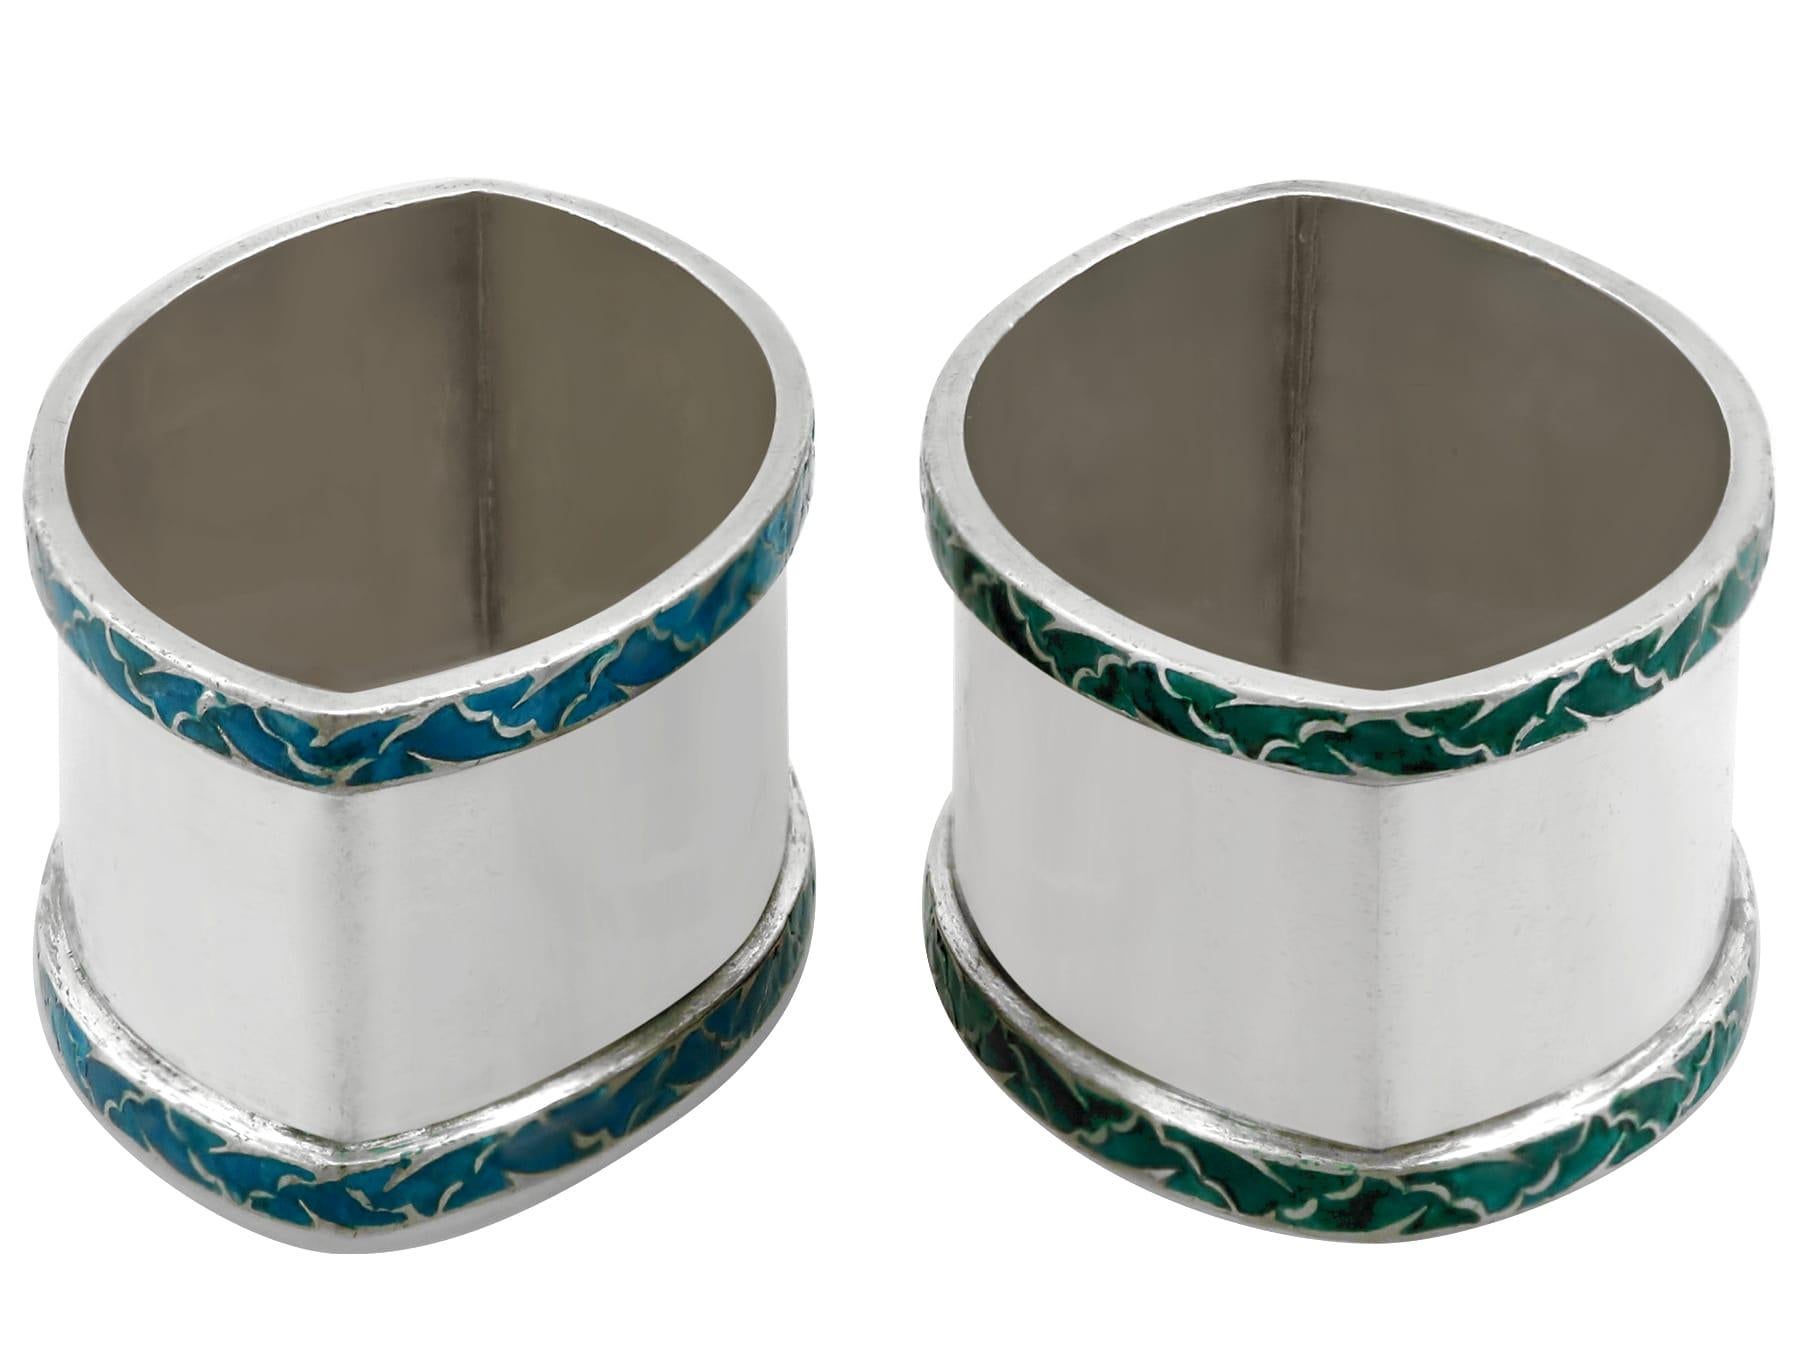 Sterling Silver and Enamel Napkin Rings by Liberty & Co Ltd In Excellent Condition For Sale In Jesmond, Newcastle Upon Tyne